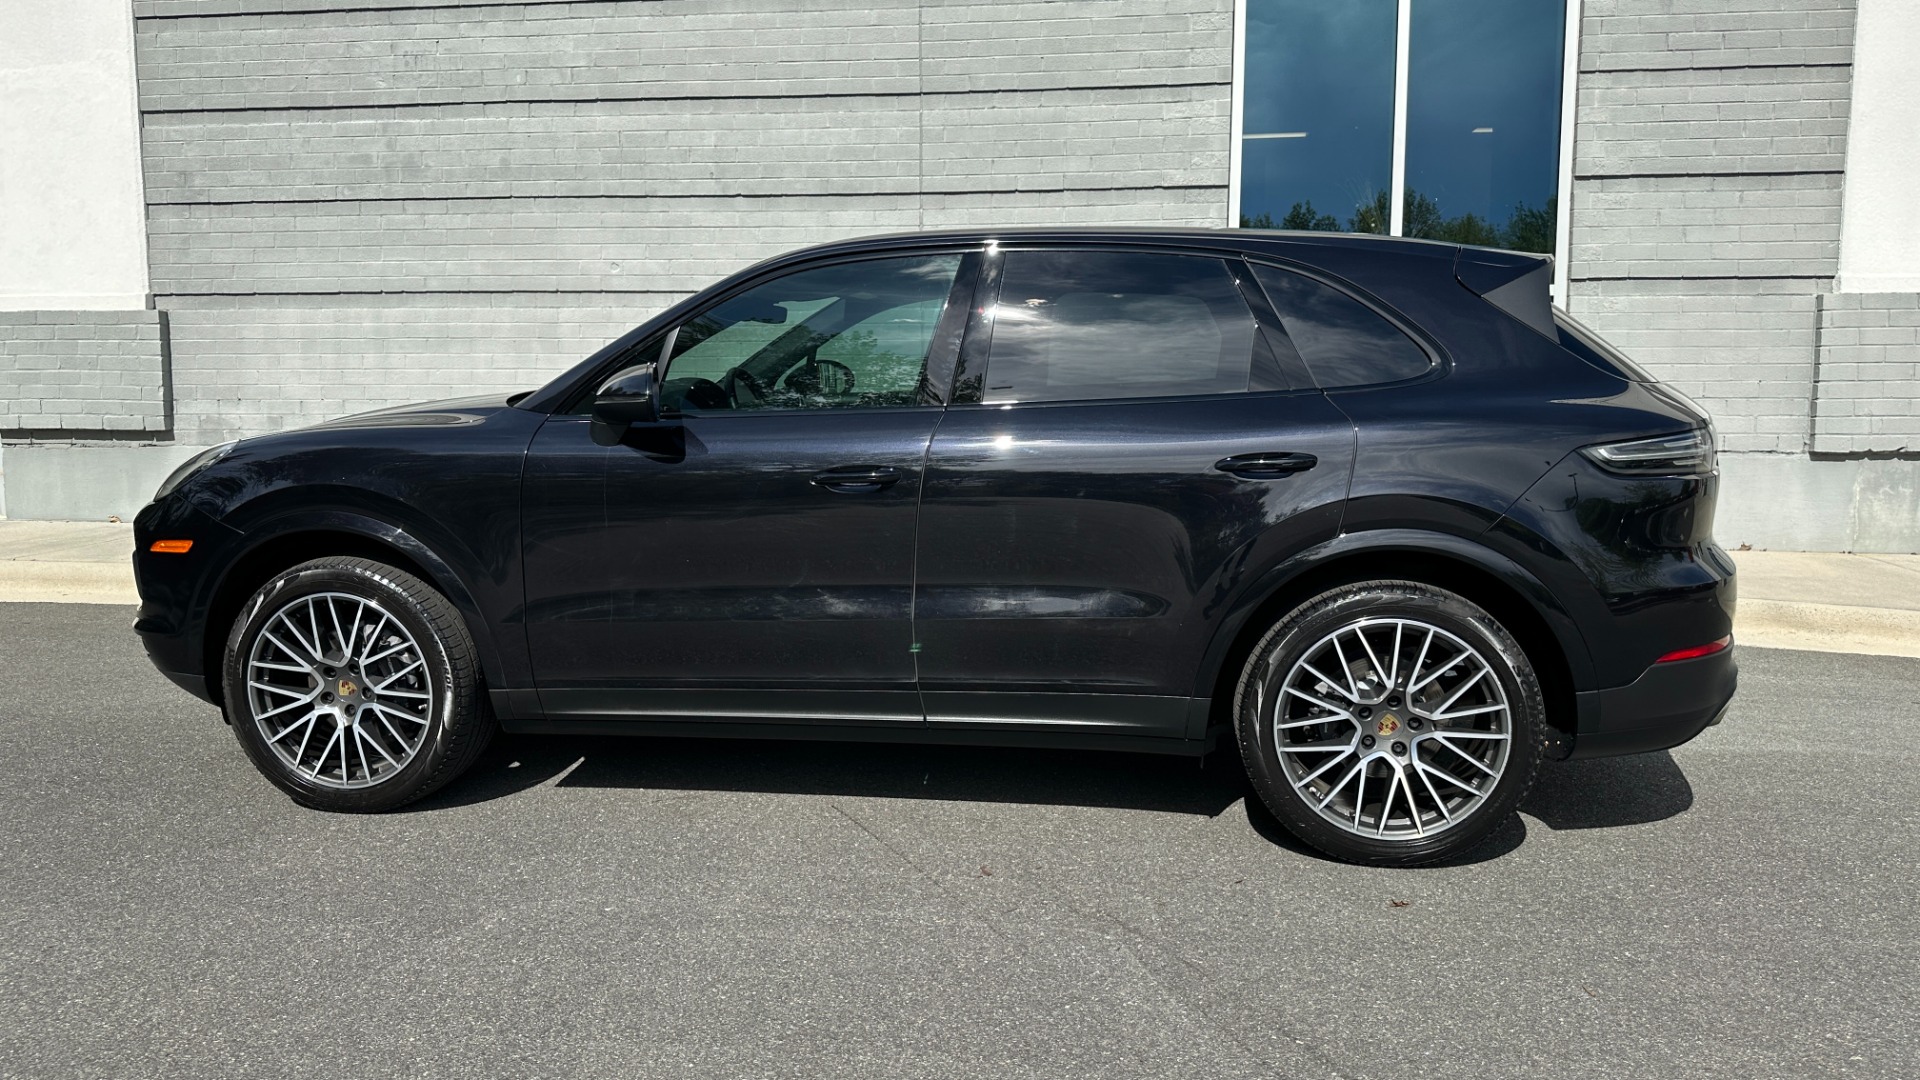 Used 2019 Porsche Cayenne AWD / PREMIUM / TOWING PKG / BOSE AUDIO / GLOSS BLACK TRIM for sale Sold at Formula Imports in Charlotte NC 28227 6